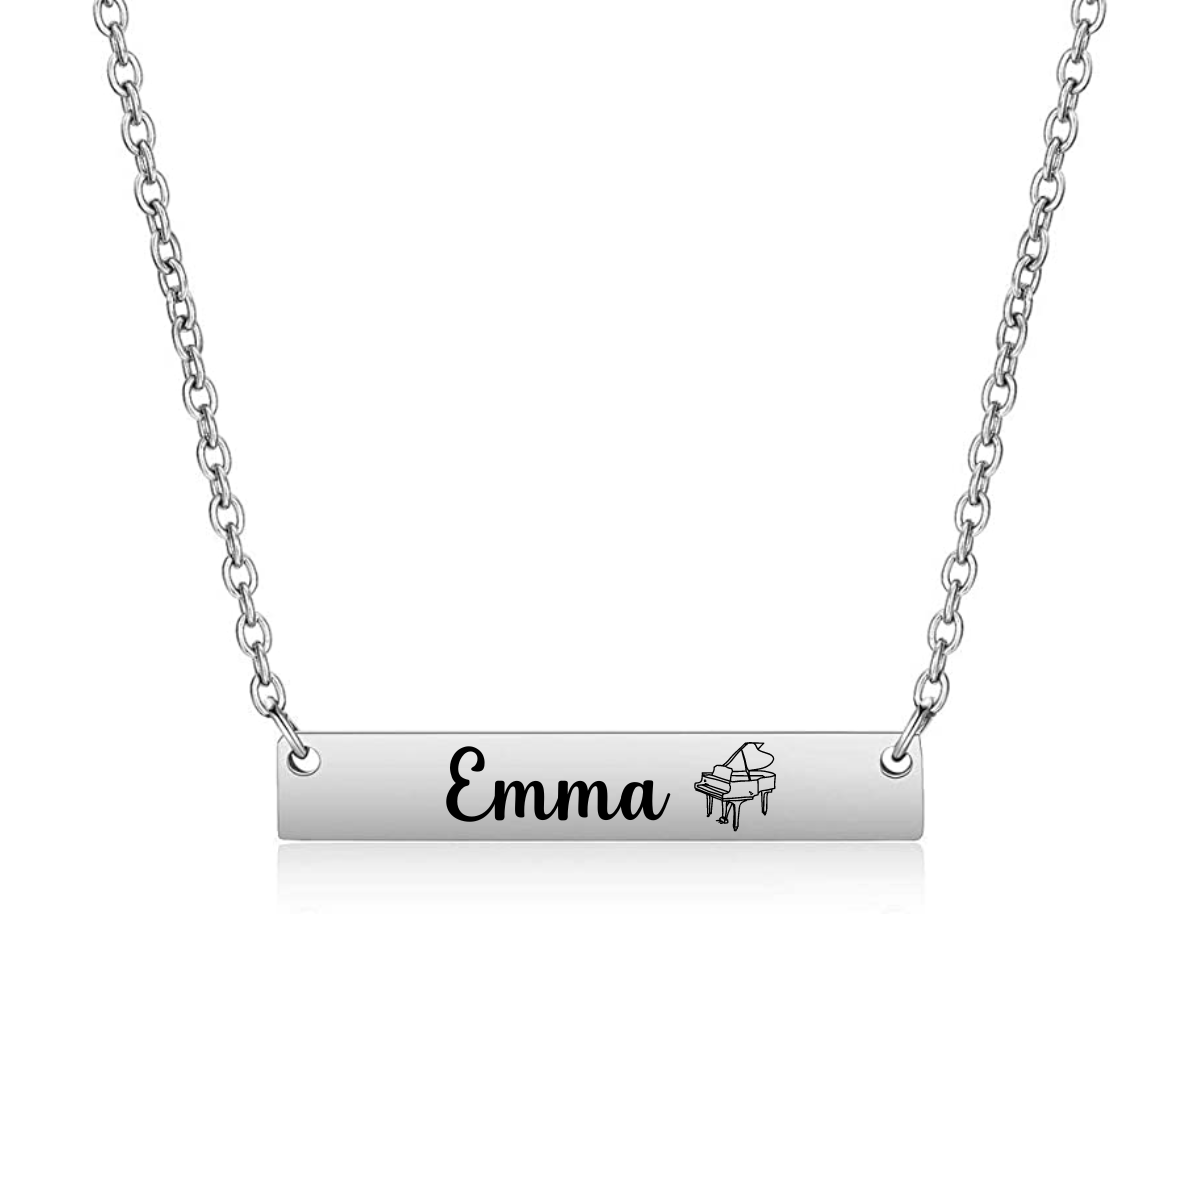 Personalized Piano Bar Necklace